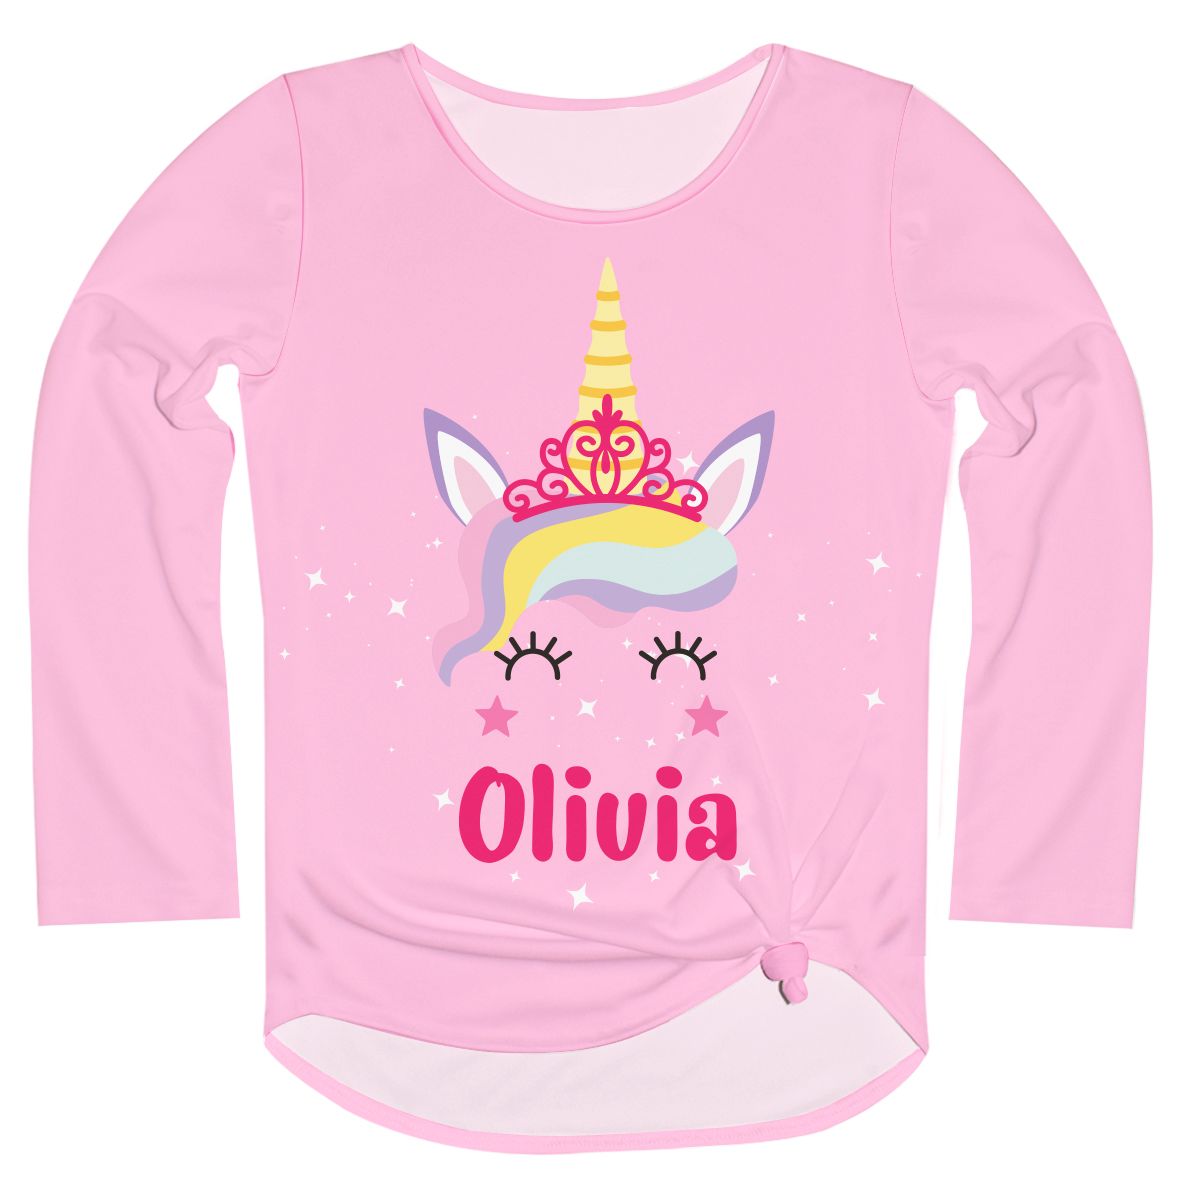 Unicorn Name Pink Long Sleeve Knot Top - Wimziy&Co.